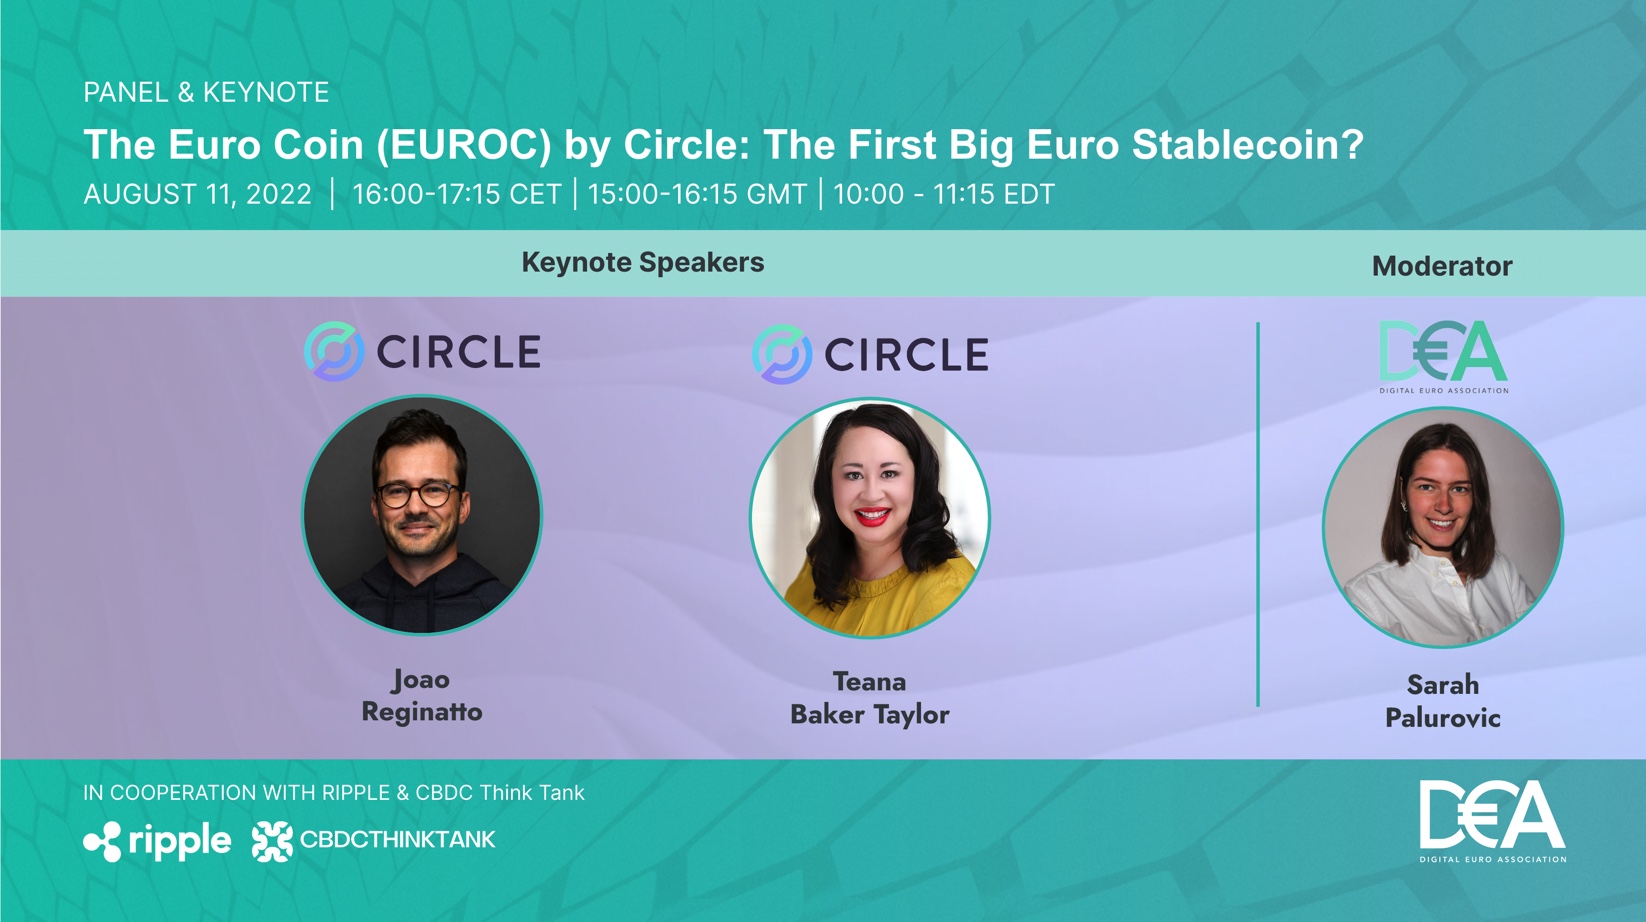 Event Summary: The Euro Coin (EUROC) by Circle: The First Big Euro Stablecoin?